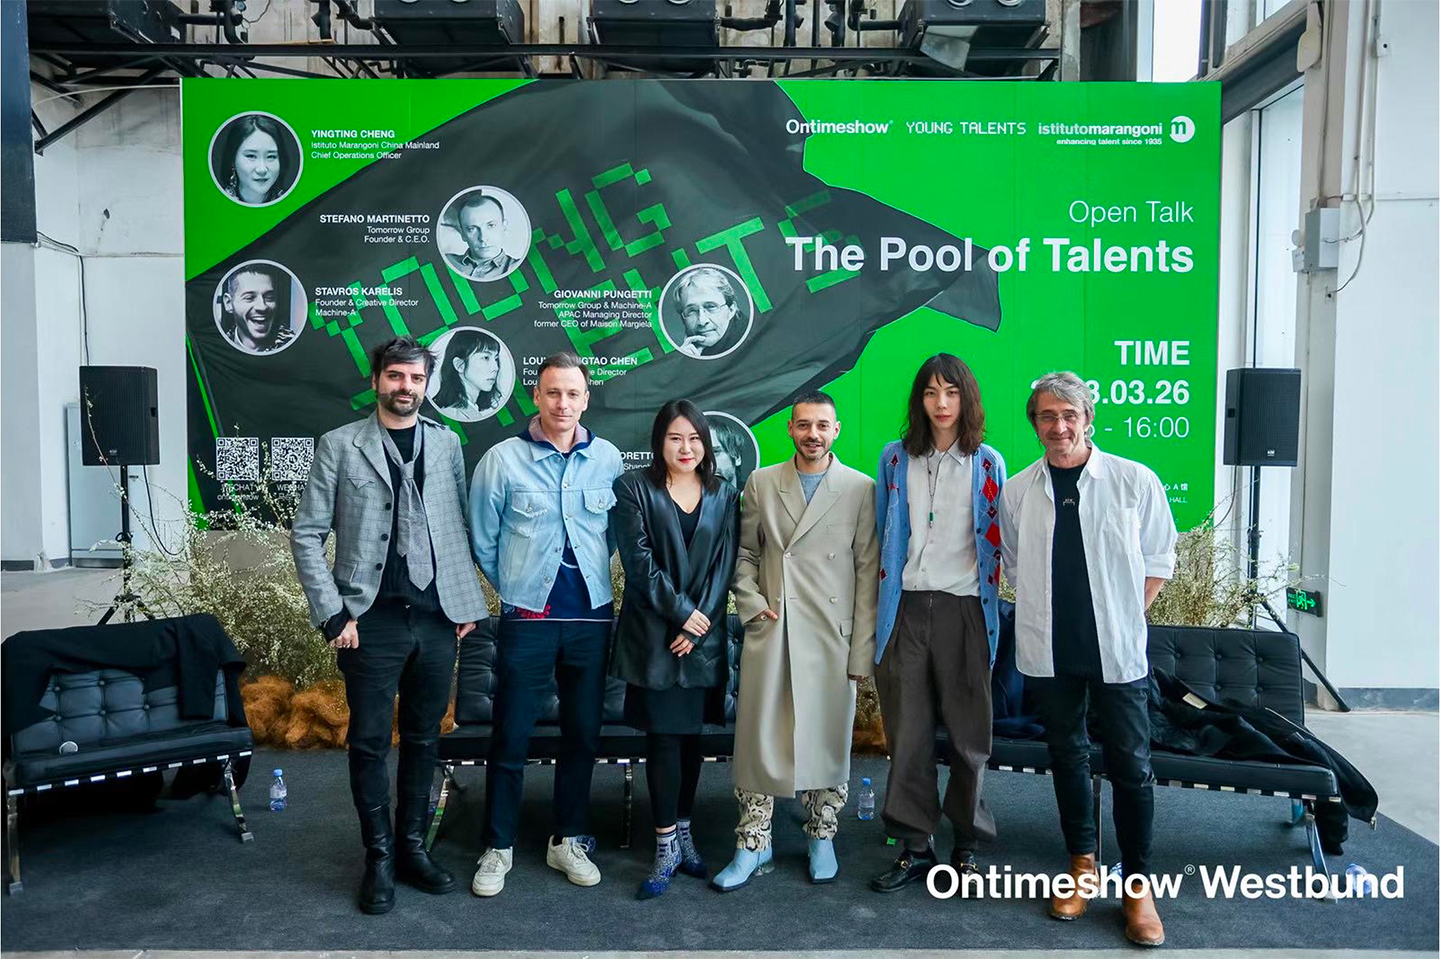 From left to right, Francesco Fioretto, Stefano Martinetto, Yingting Cheng, Stavros Karelis, Louis Shengtao Chen and Giovanni Pungetti as guests of Istituto Marangoni Shanghai's “The Talent Pool”, a public lecture at the Shanghai West Bund Art Centre in collaboration with Ontimeshow